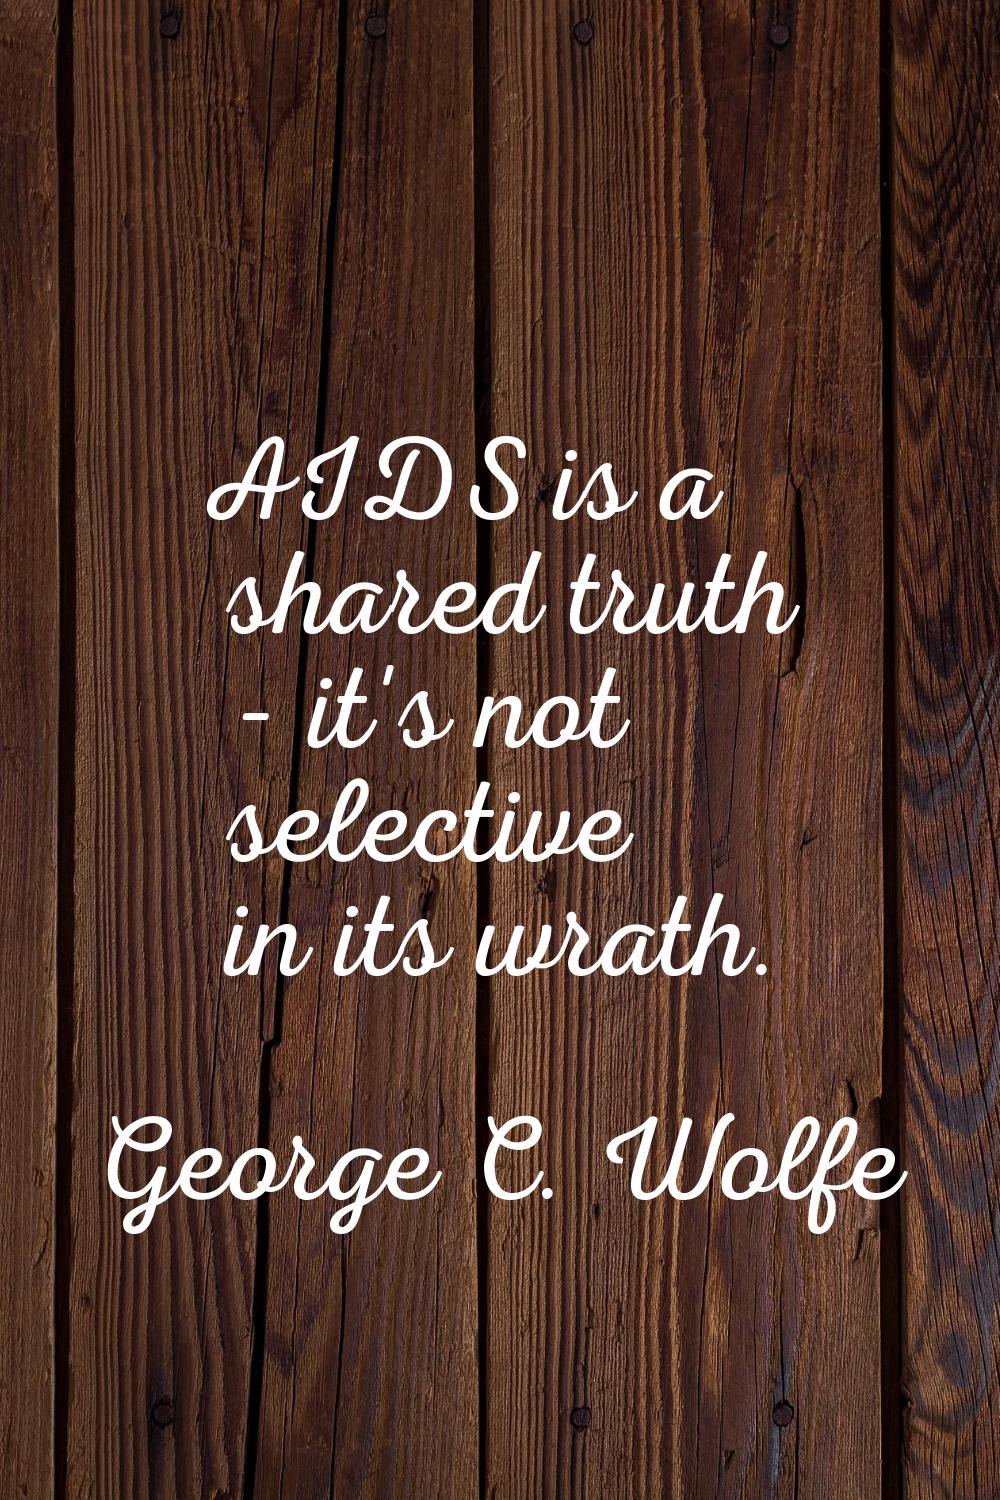 AIDS is a shared truth - it's not selective in its wrath.